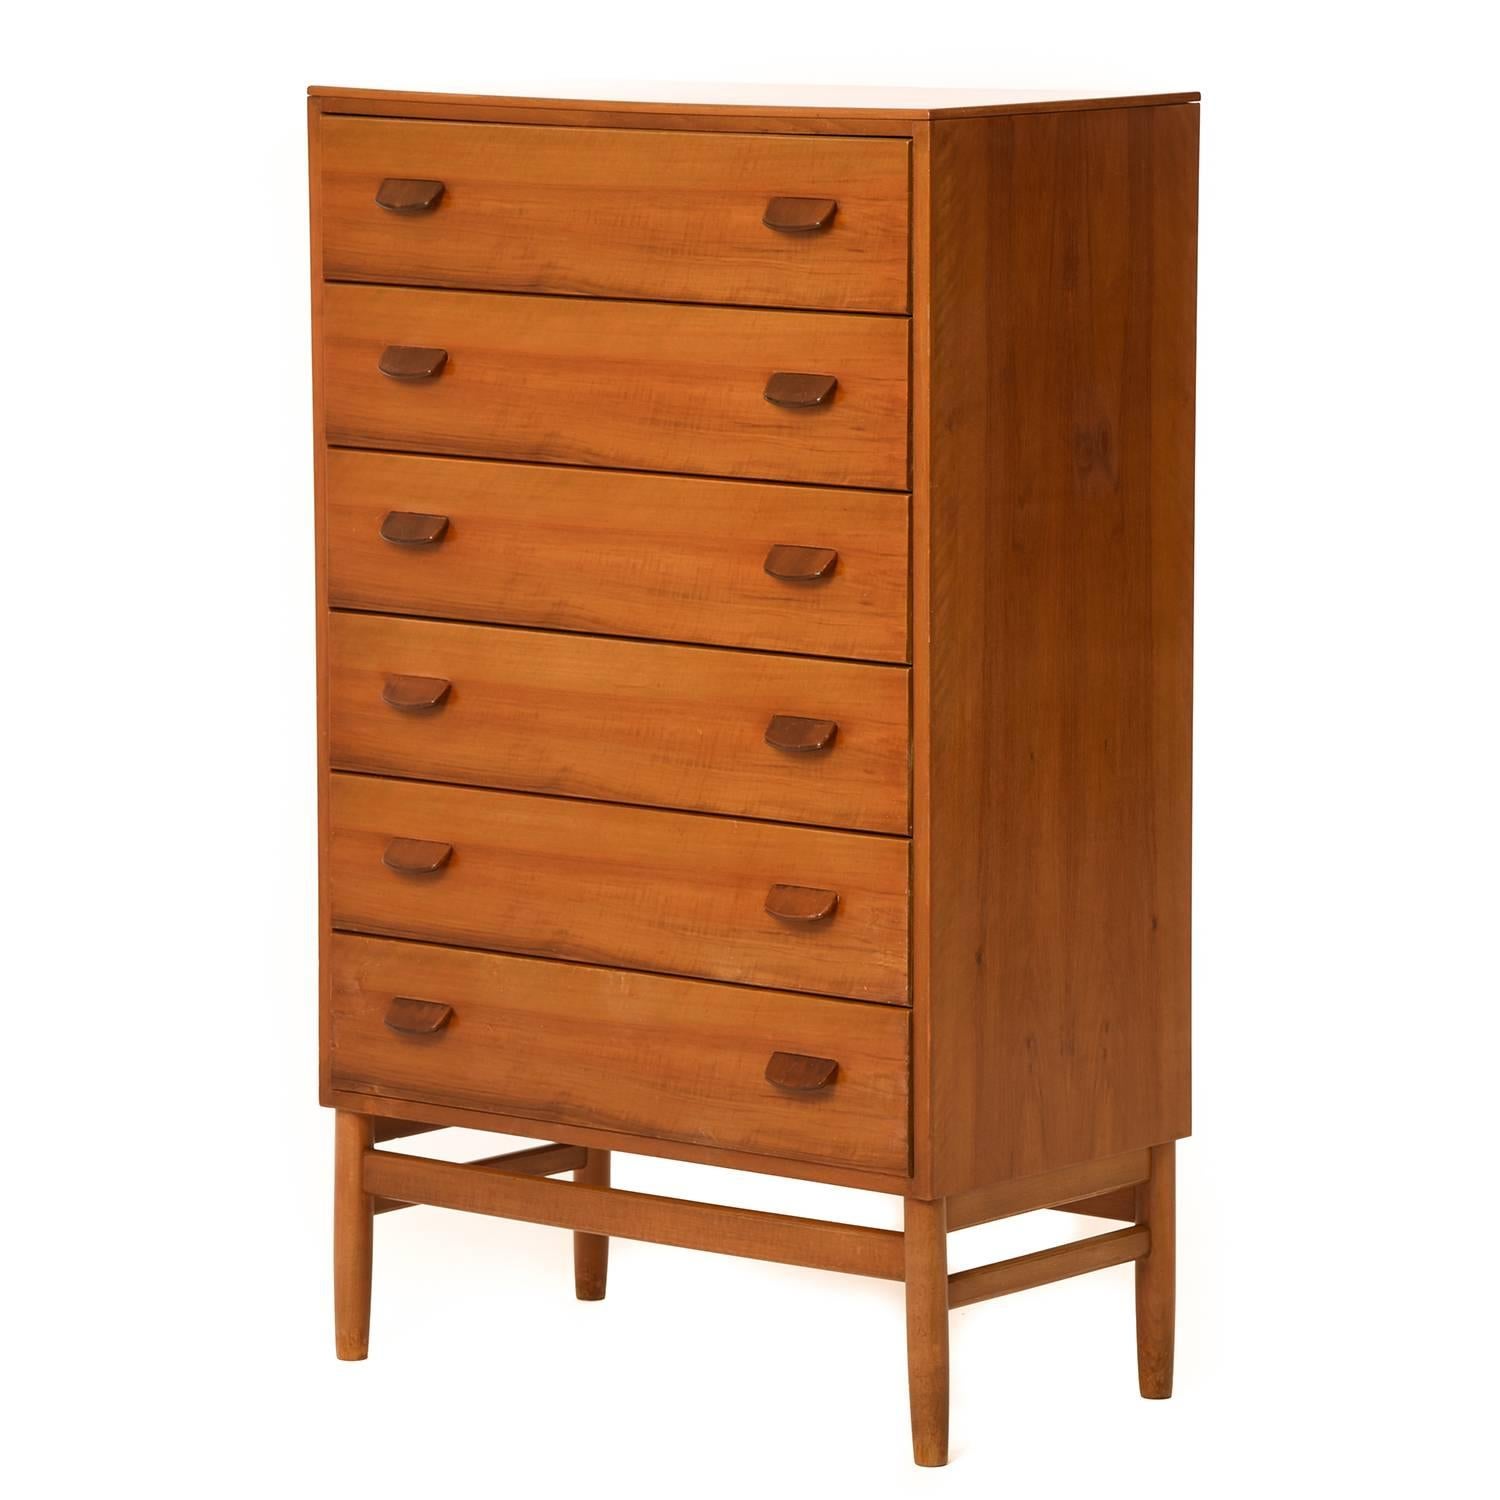 Gorgeous mahogany Poul Volther chest of drawers.